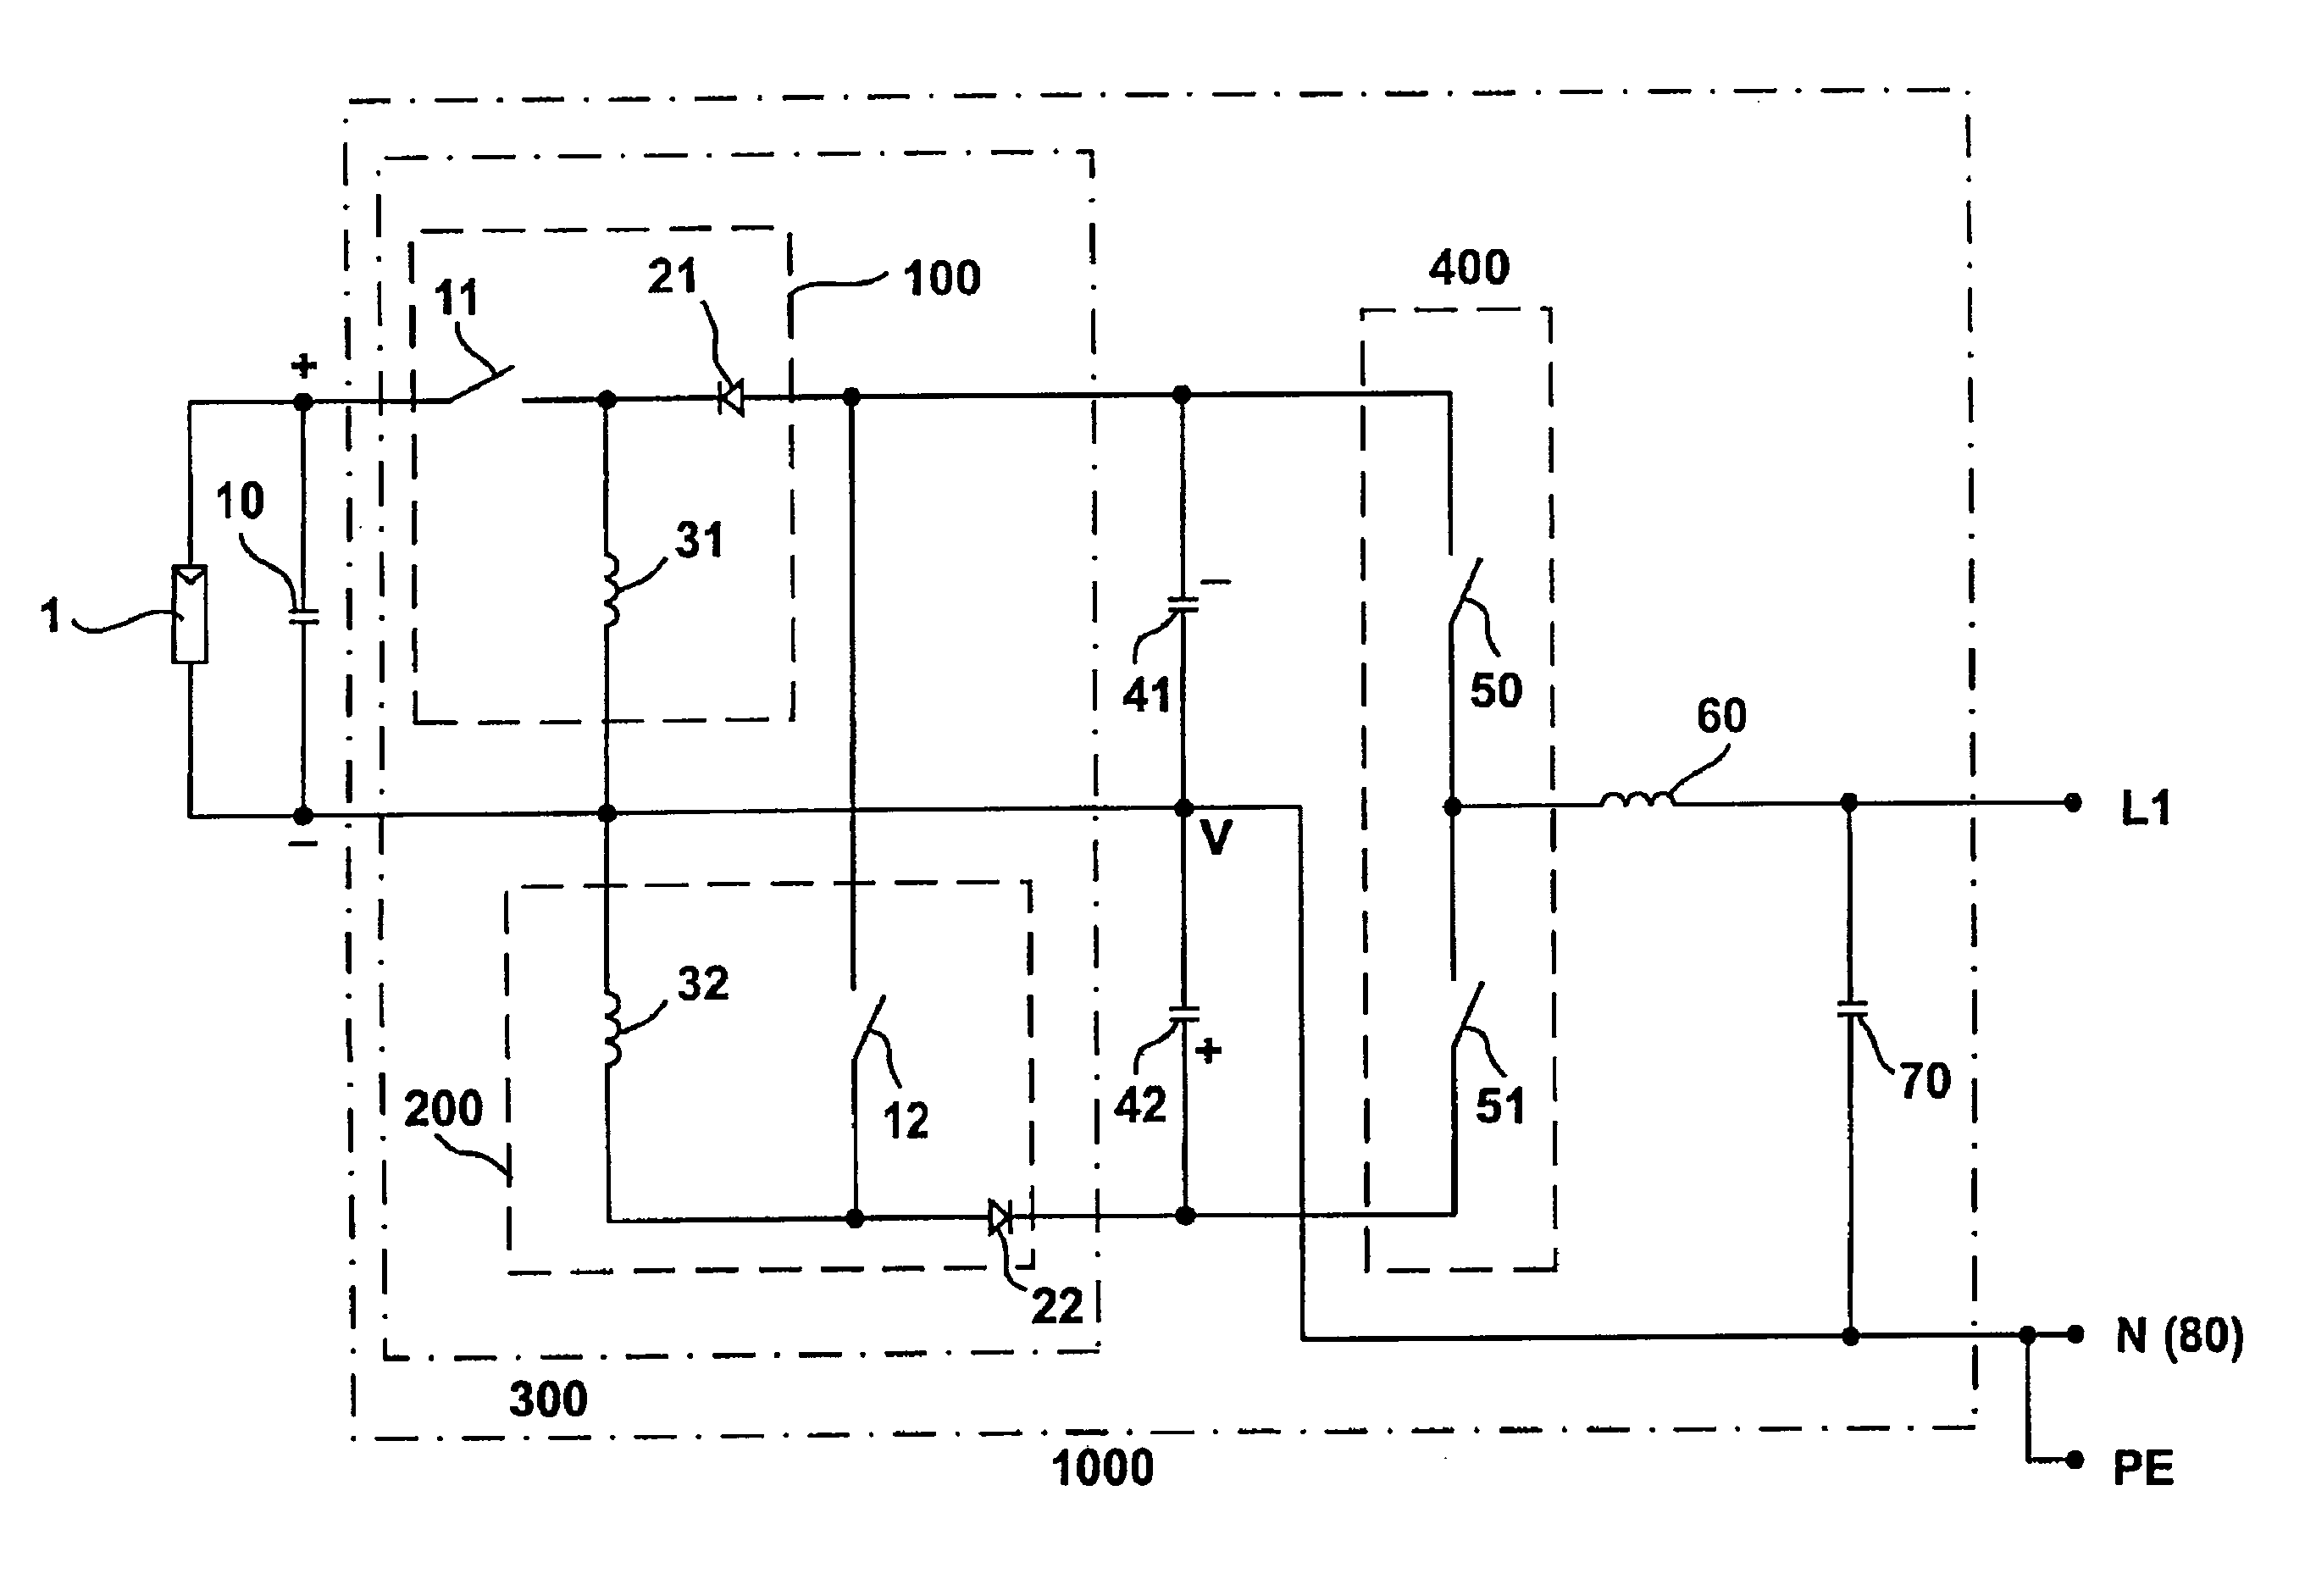 Circuit apparatus for transformerless conversion of an electric direct voltage into an alternating voltage